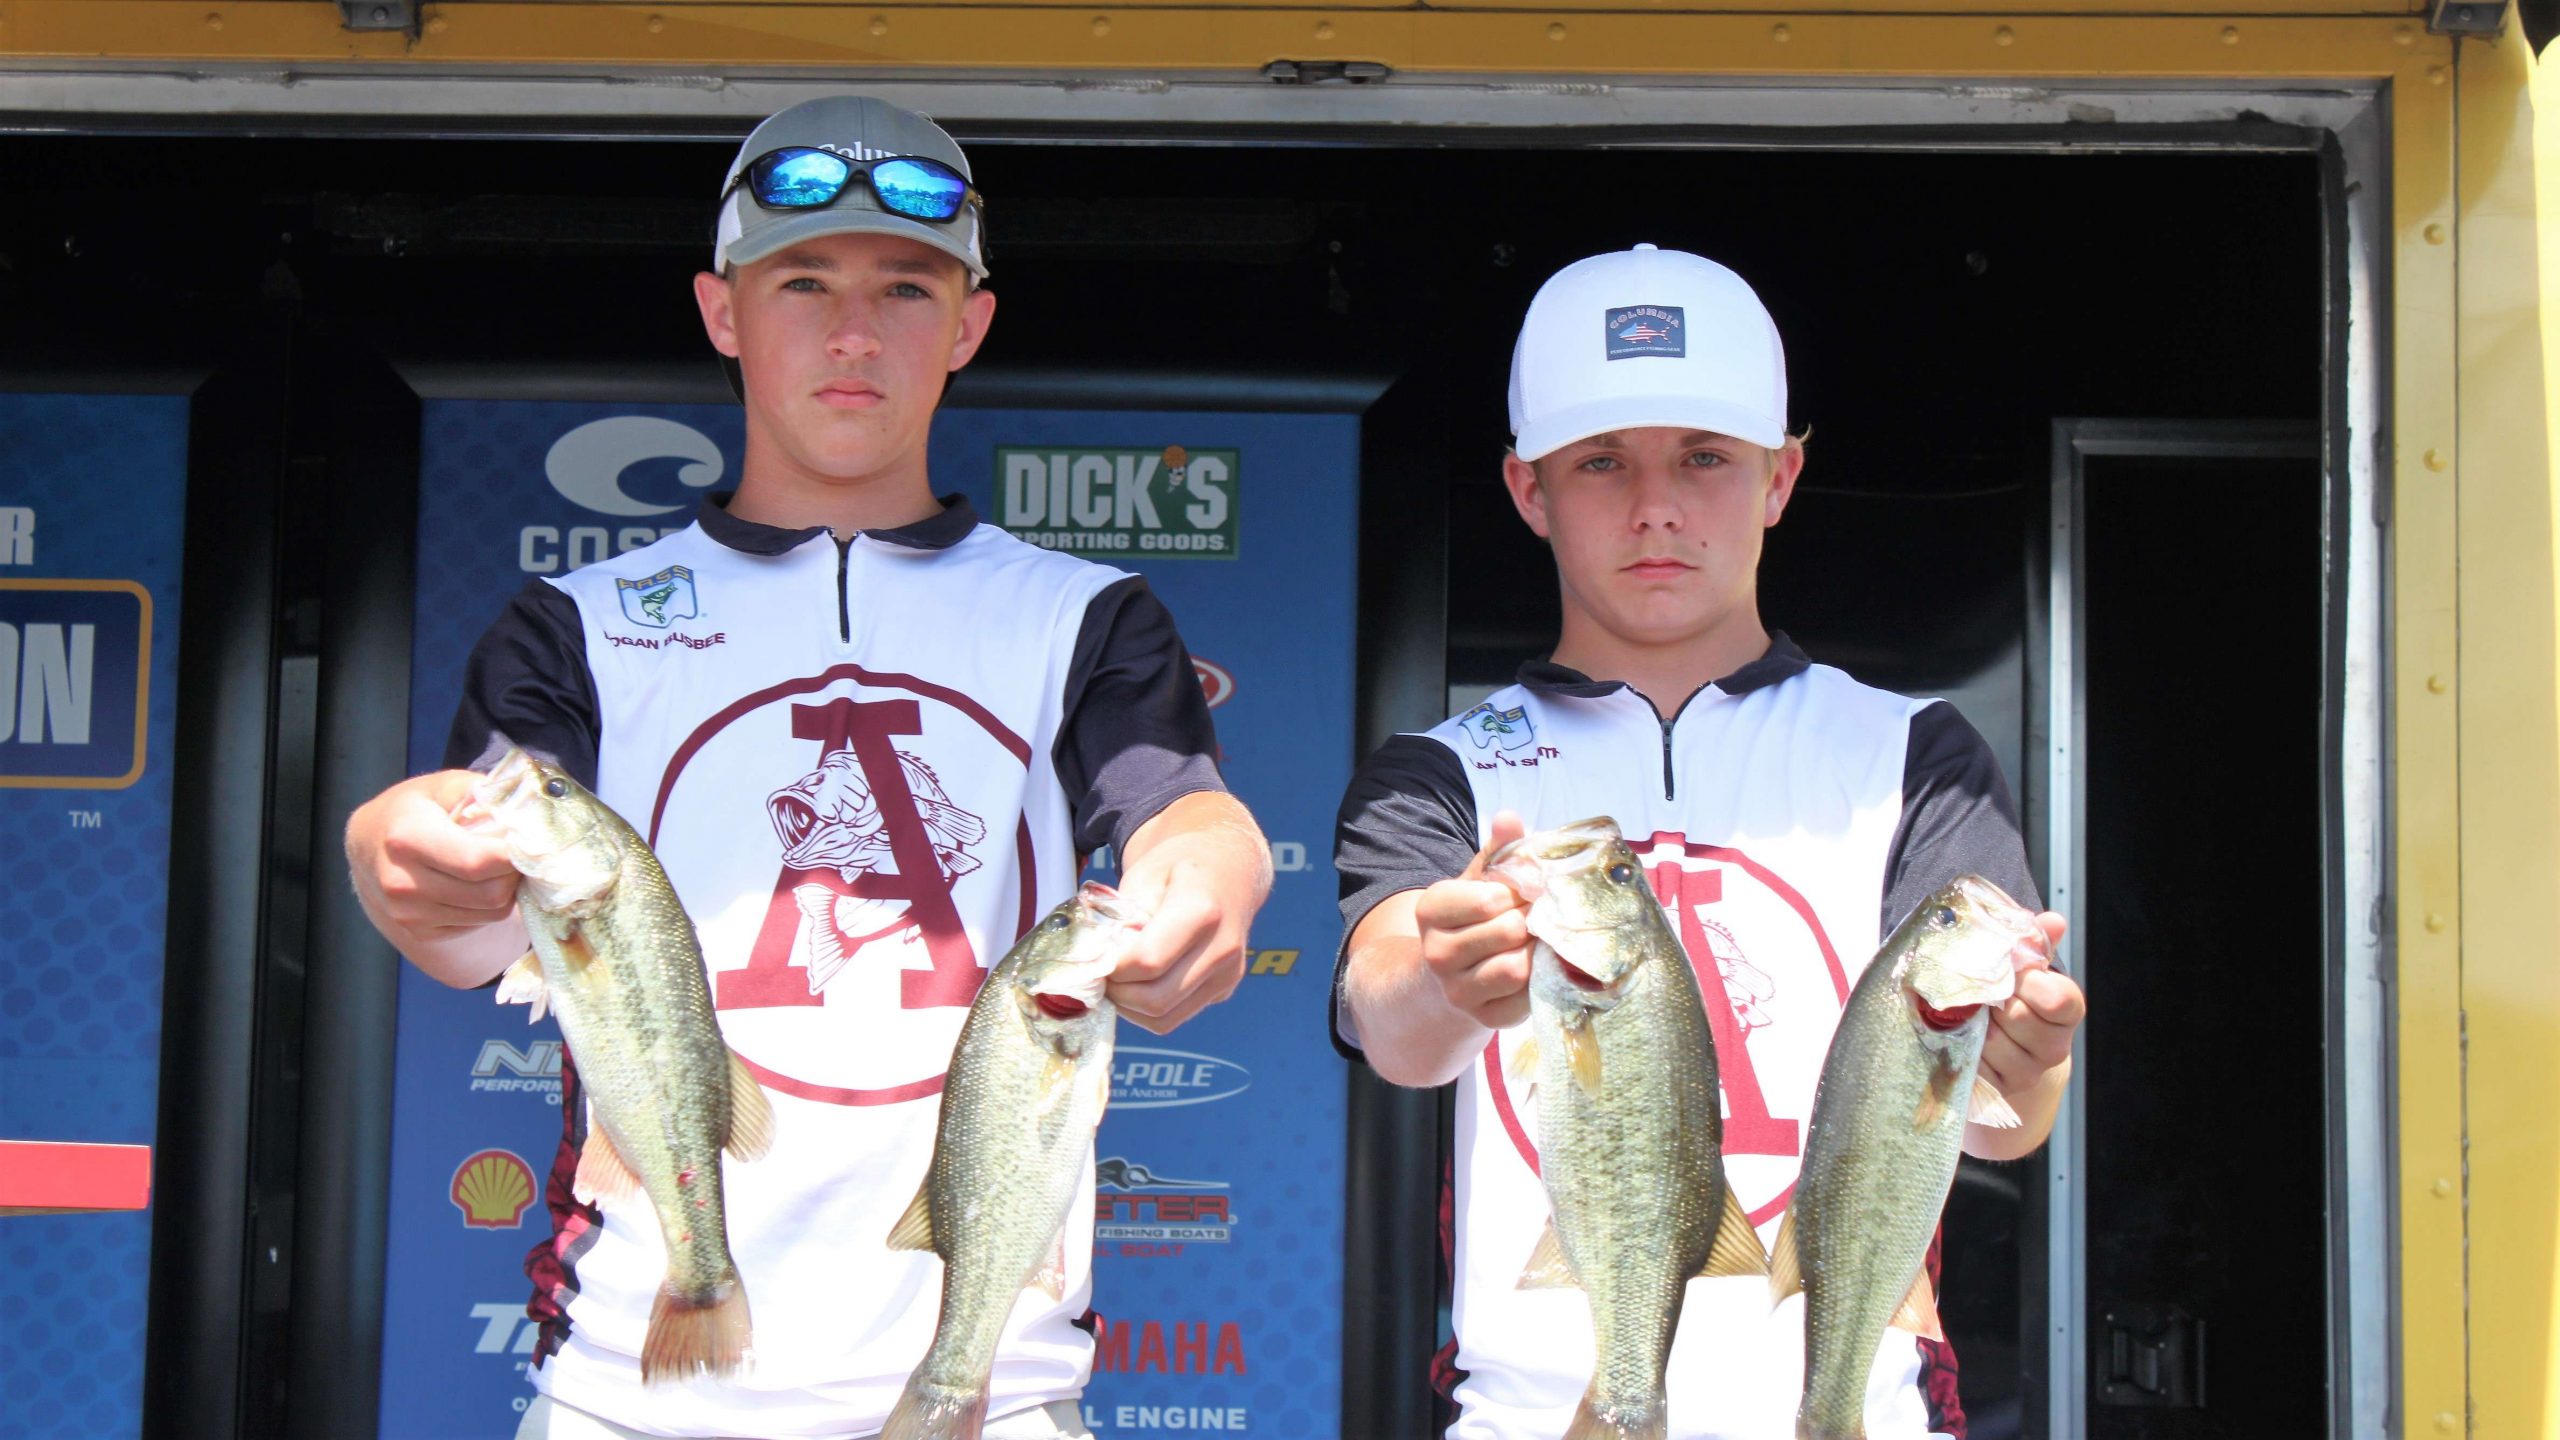 Landon Smith and Logan Busbee of South Carolina are in 10th place with 7-6.
